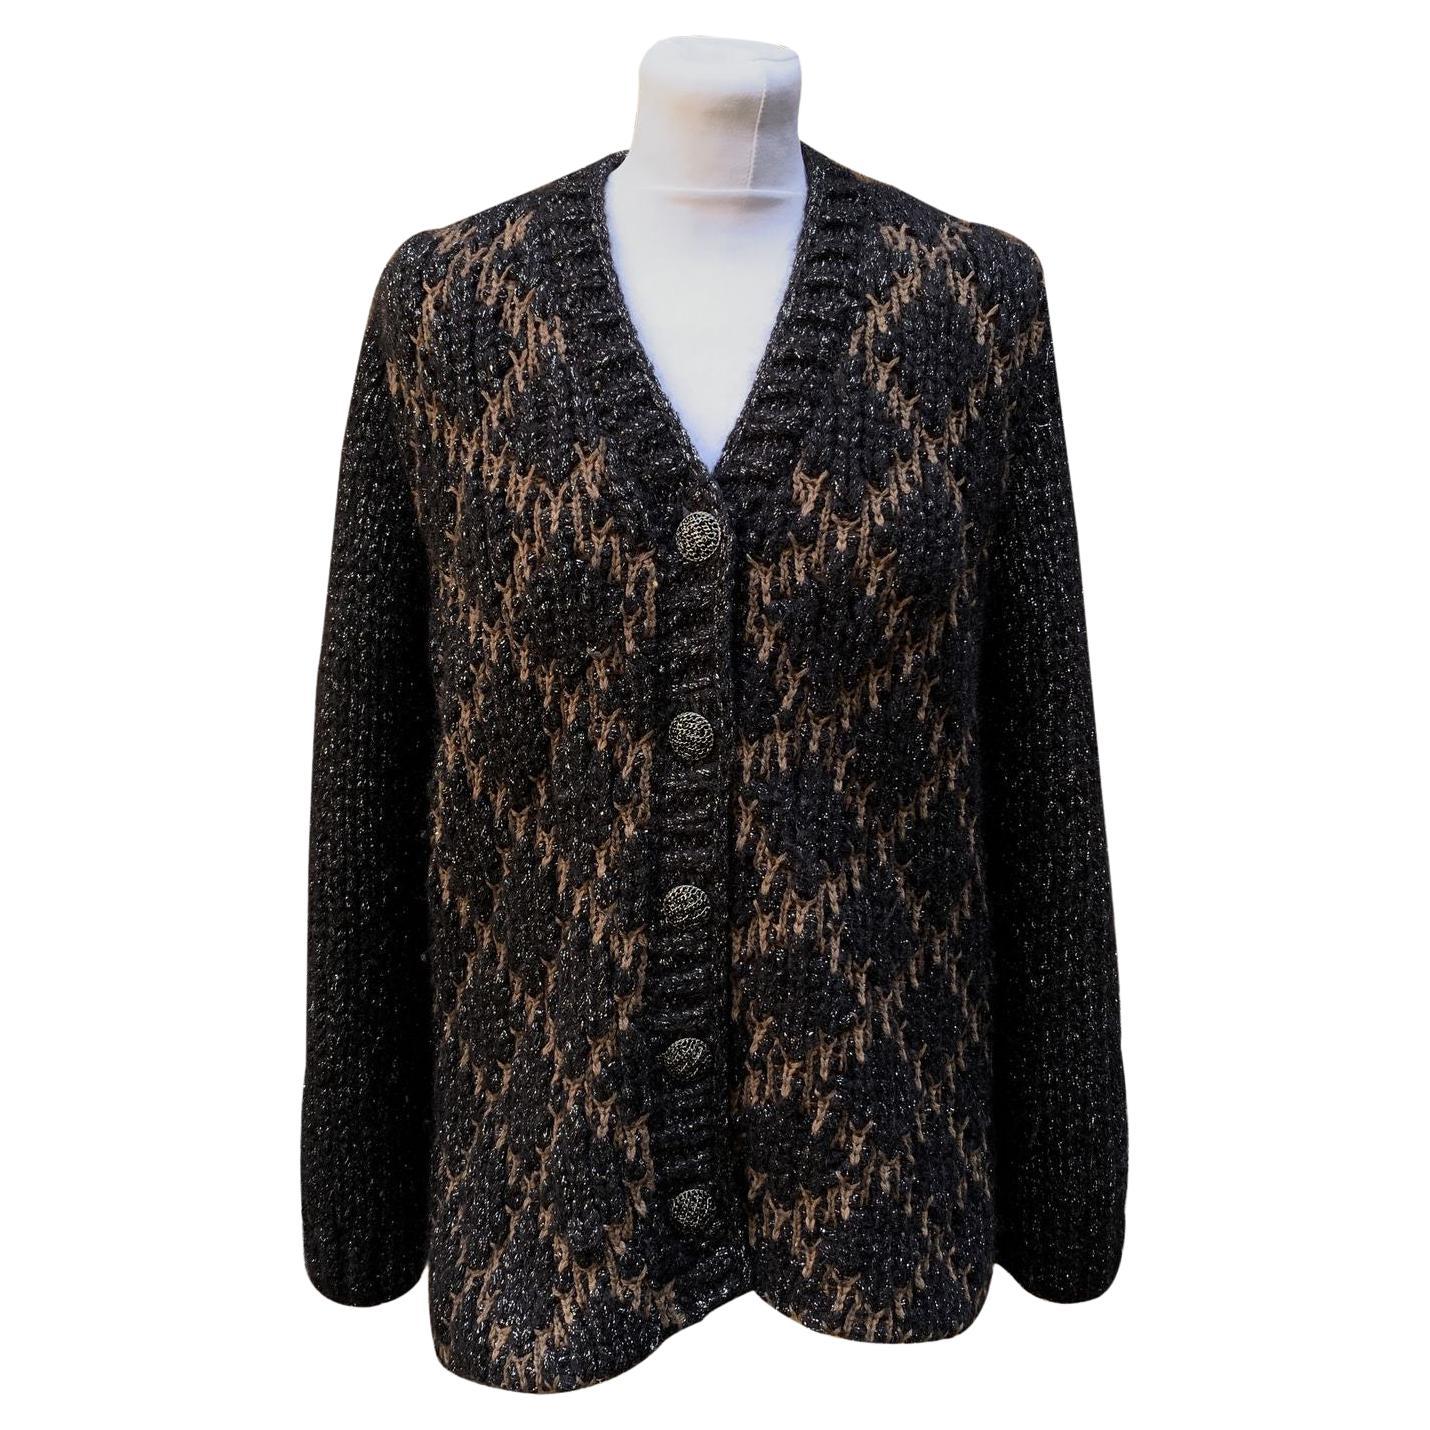 Chanel 2015 Black and Brown Lurex Knit Cardigan Size 40 FR For Sale